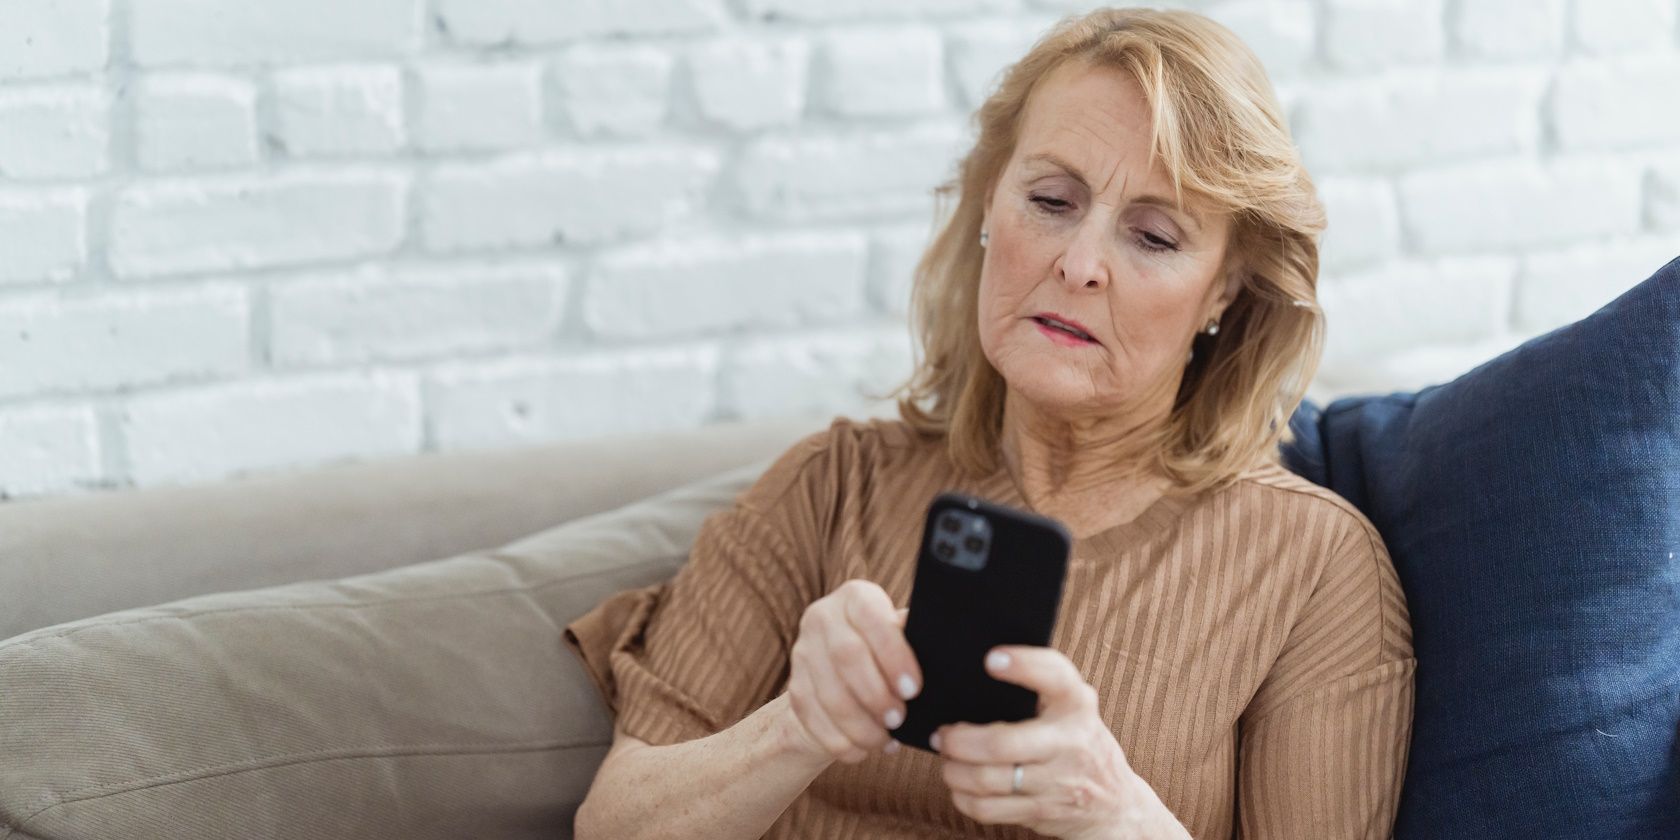 Elderly woman texting on a phone